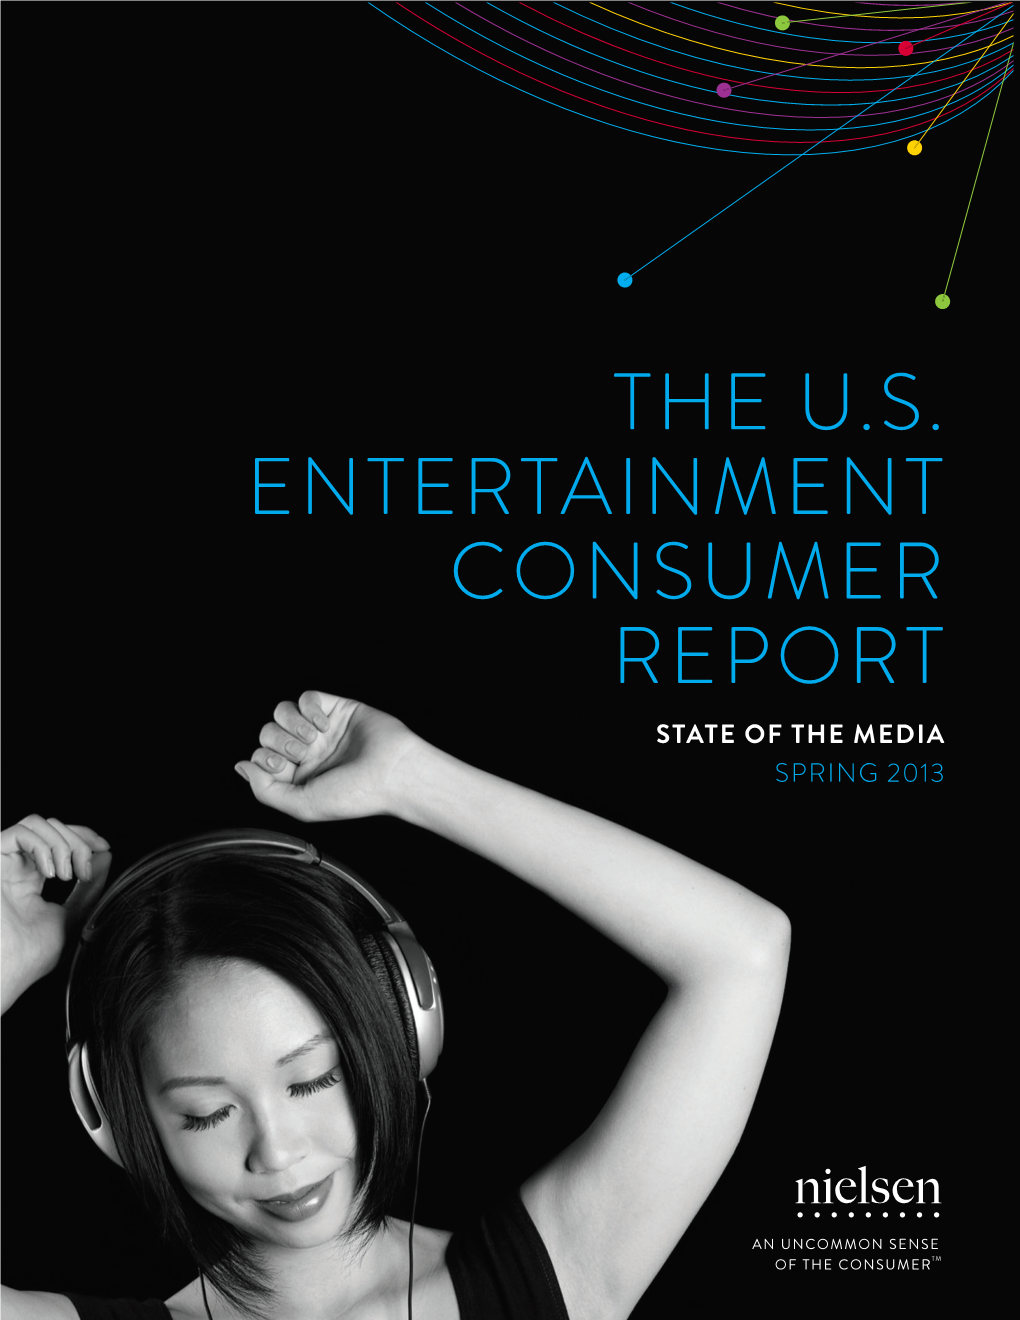 The U.S. Entertainment Consumer Report State of the Media Spring 2013